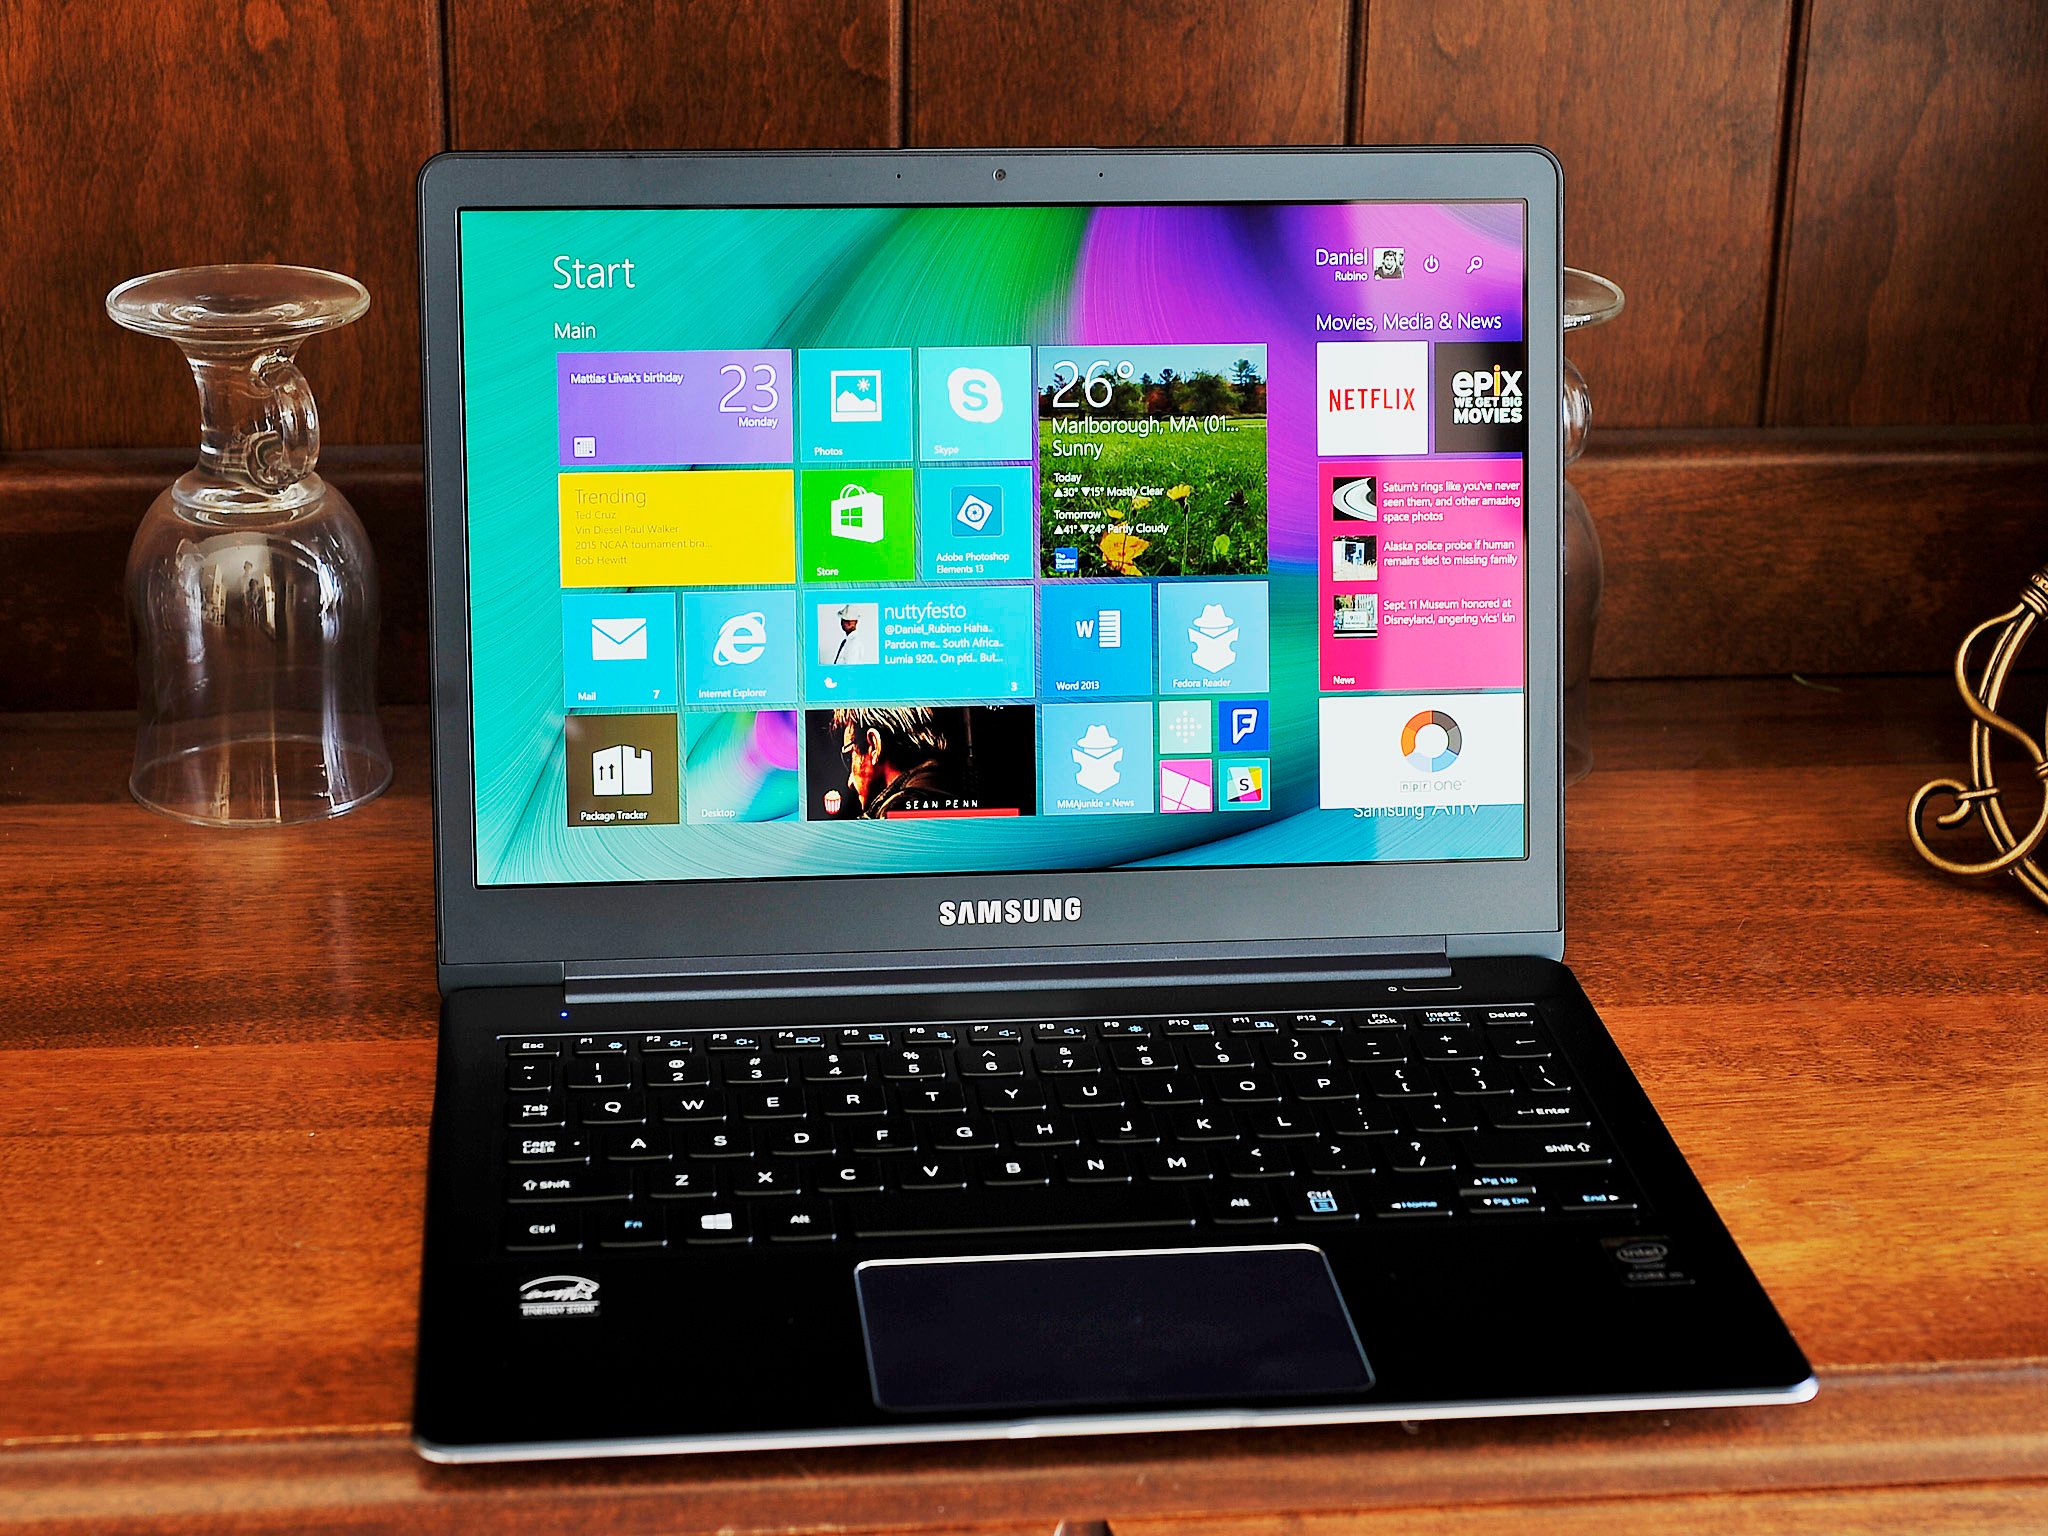 Samsung ATIV Book 9 (2015) vs the Apple MacBook - Which is the sleekest? 